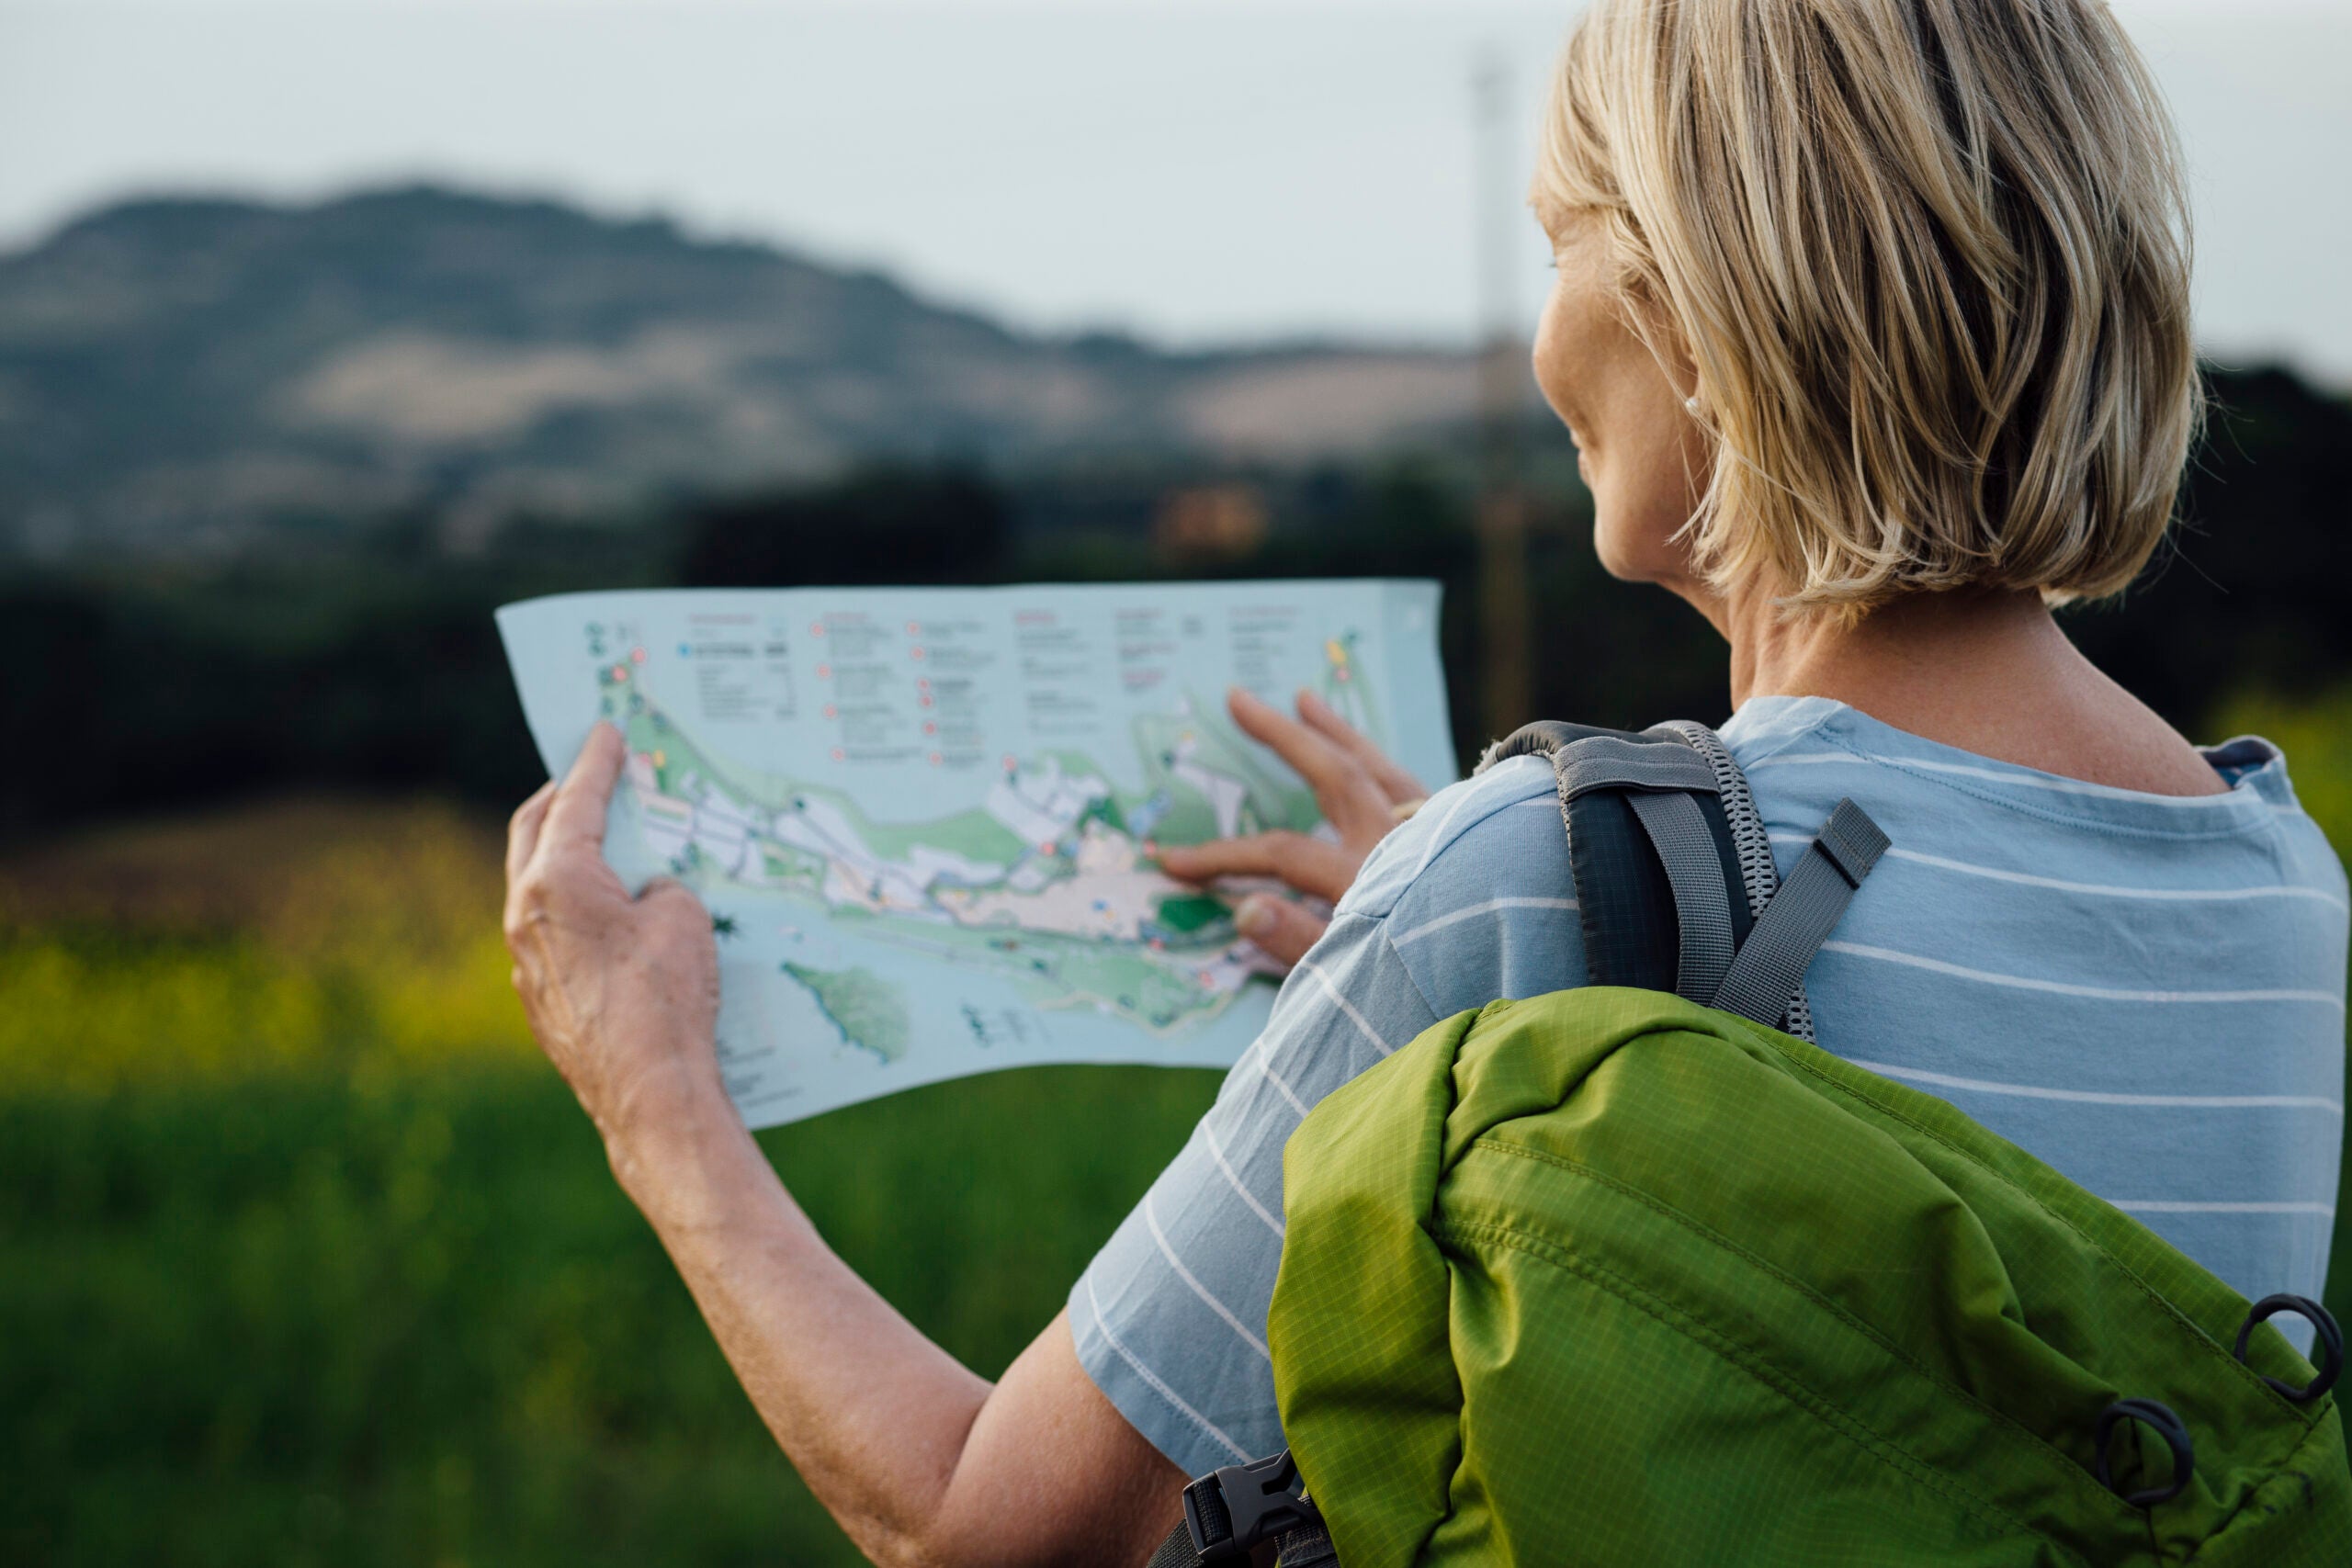 Woman wearing backpack looks at a map